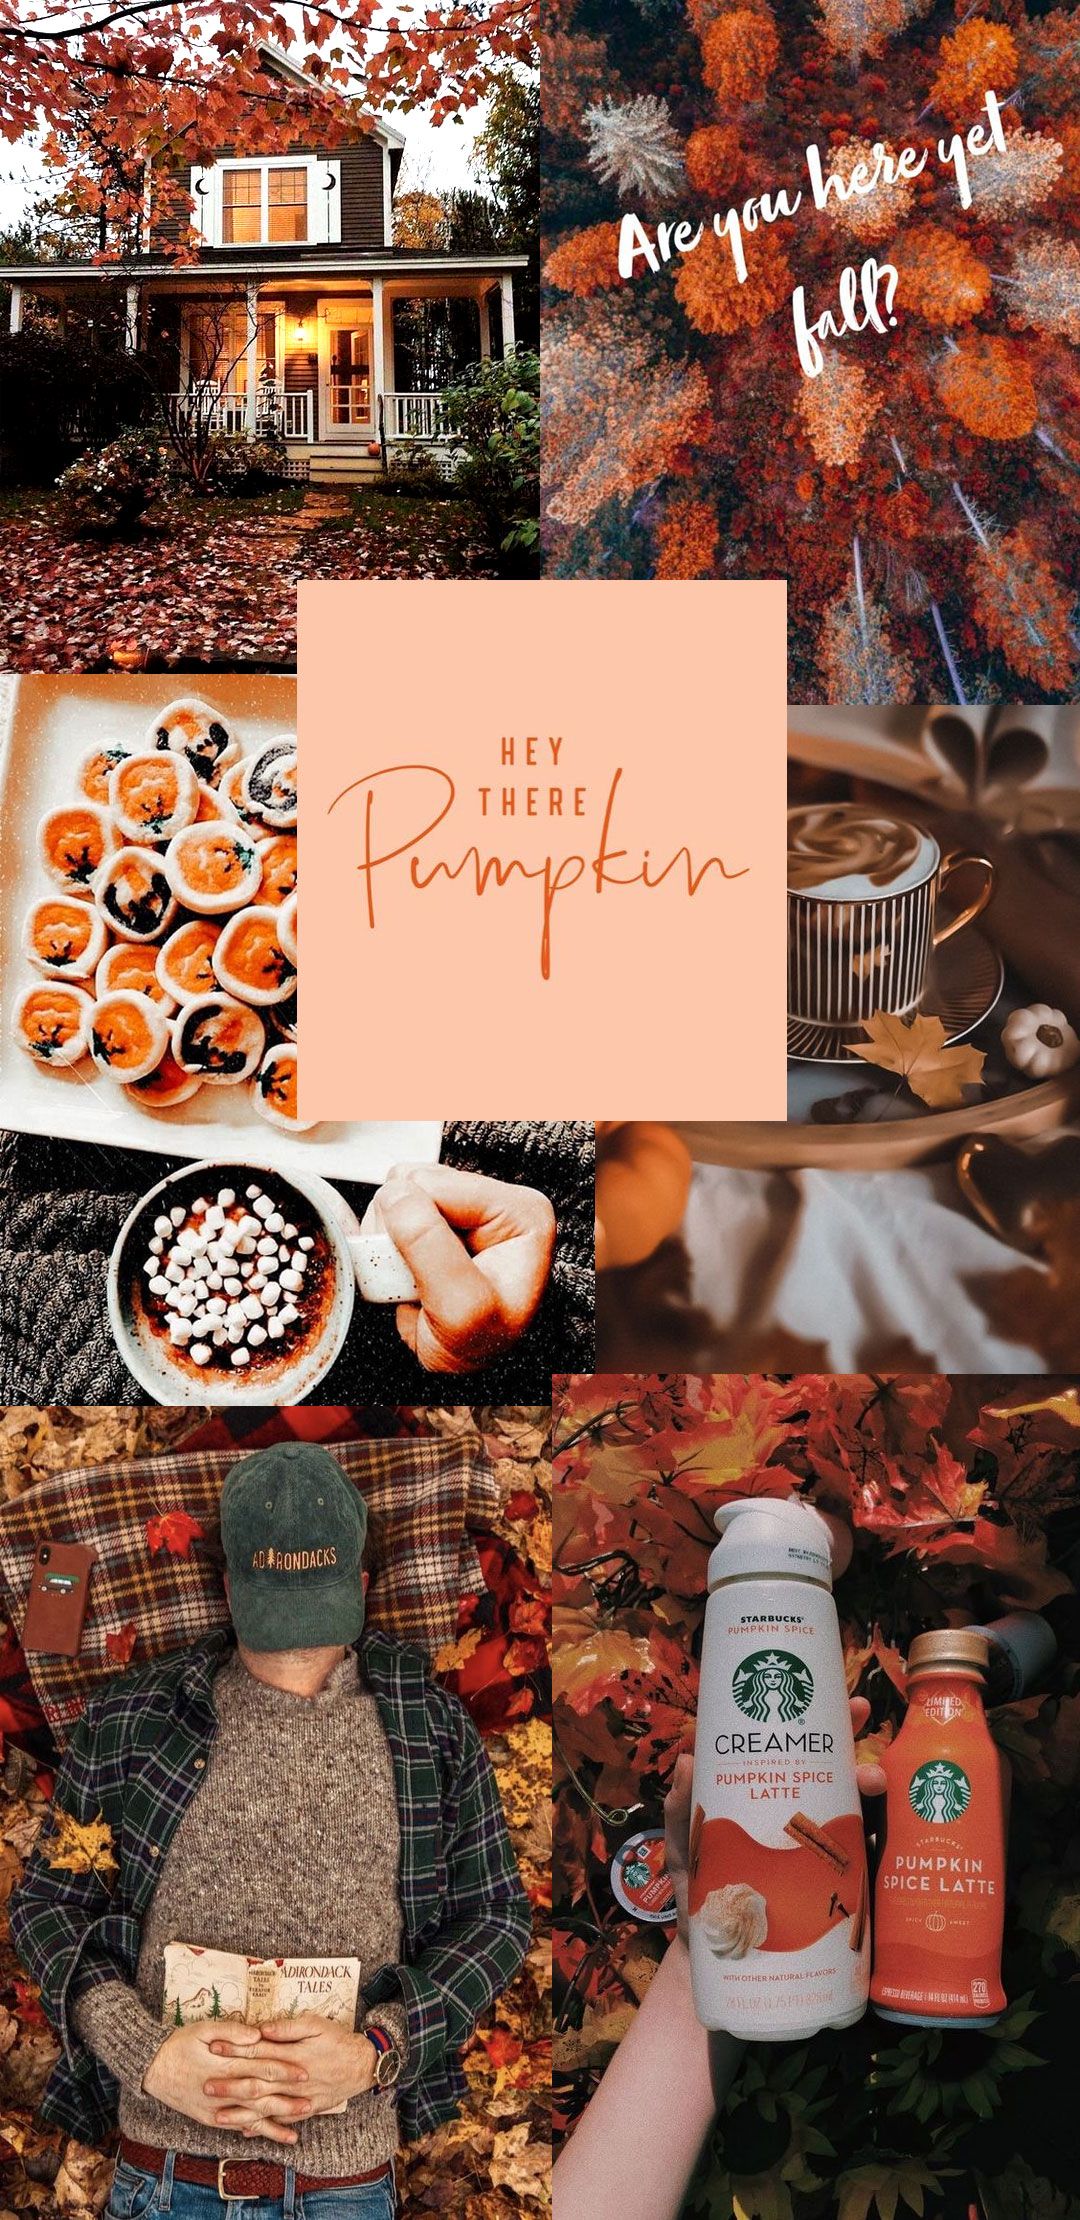 Fall Collage Wallpapers - 4k, HD Fall Collage Backgrounds on WallpaperBat